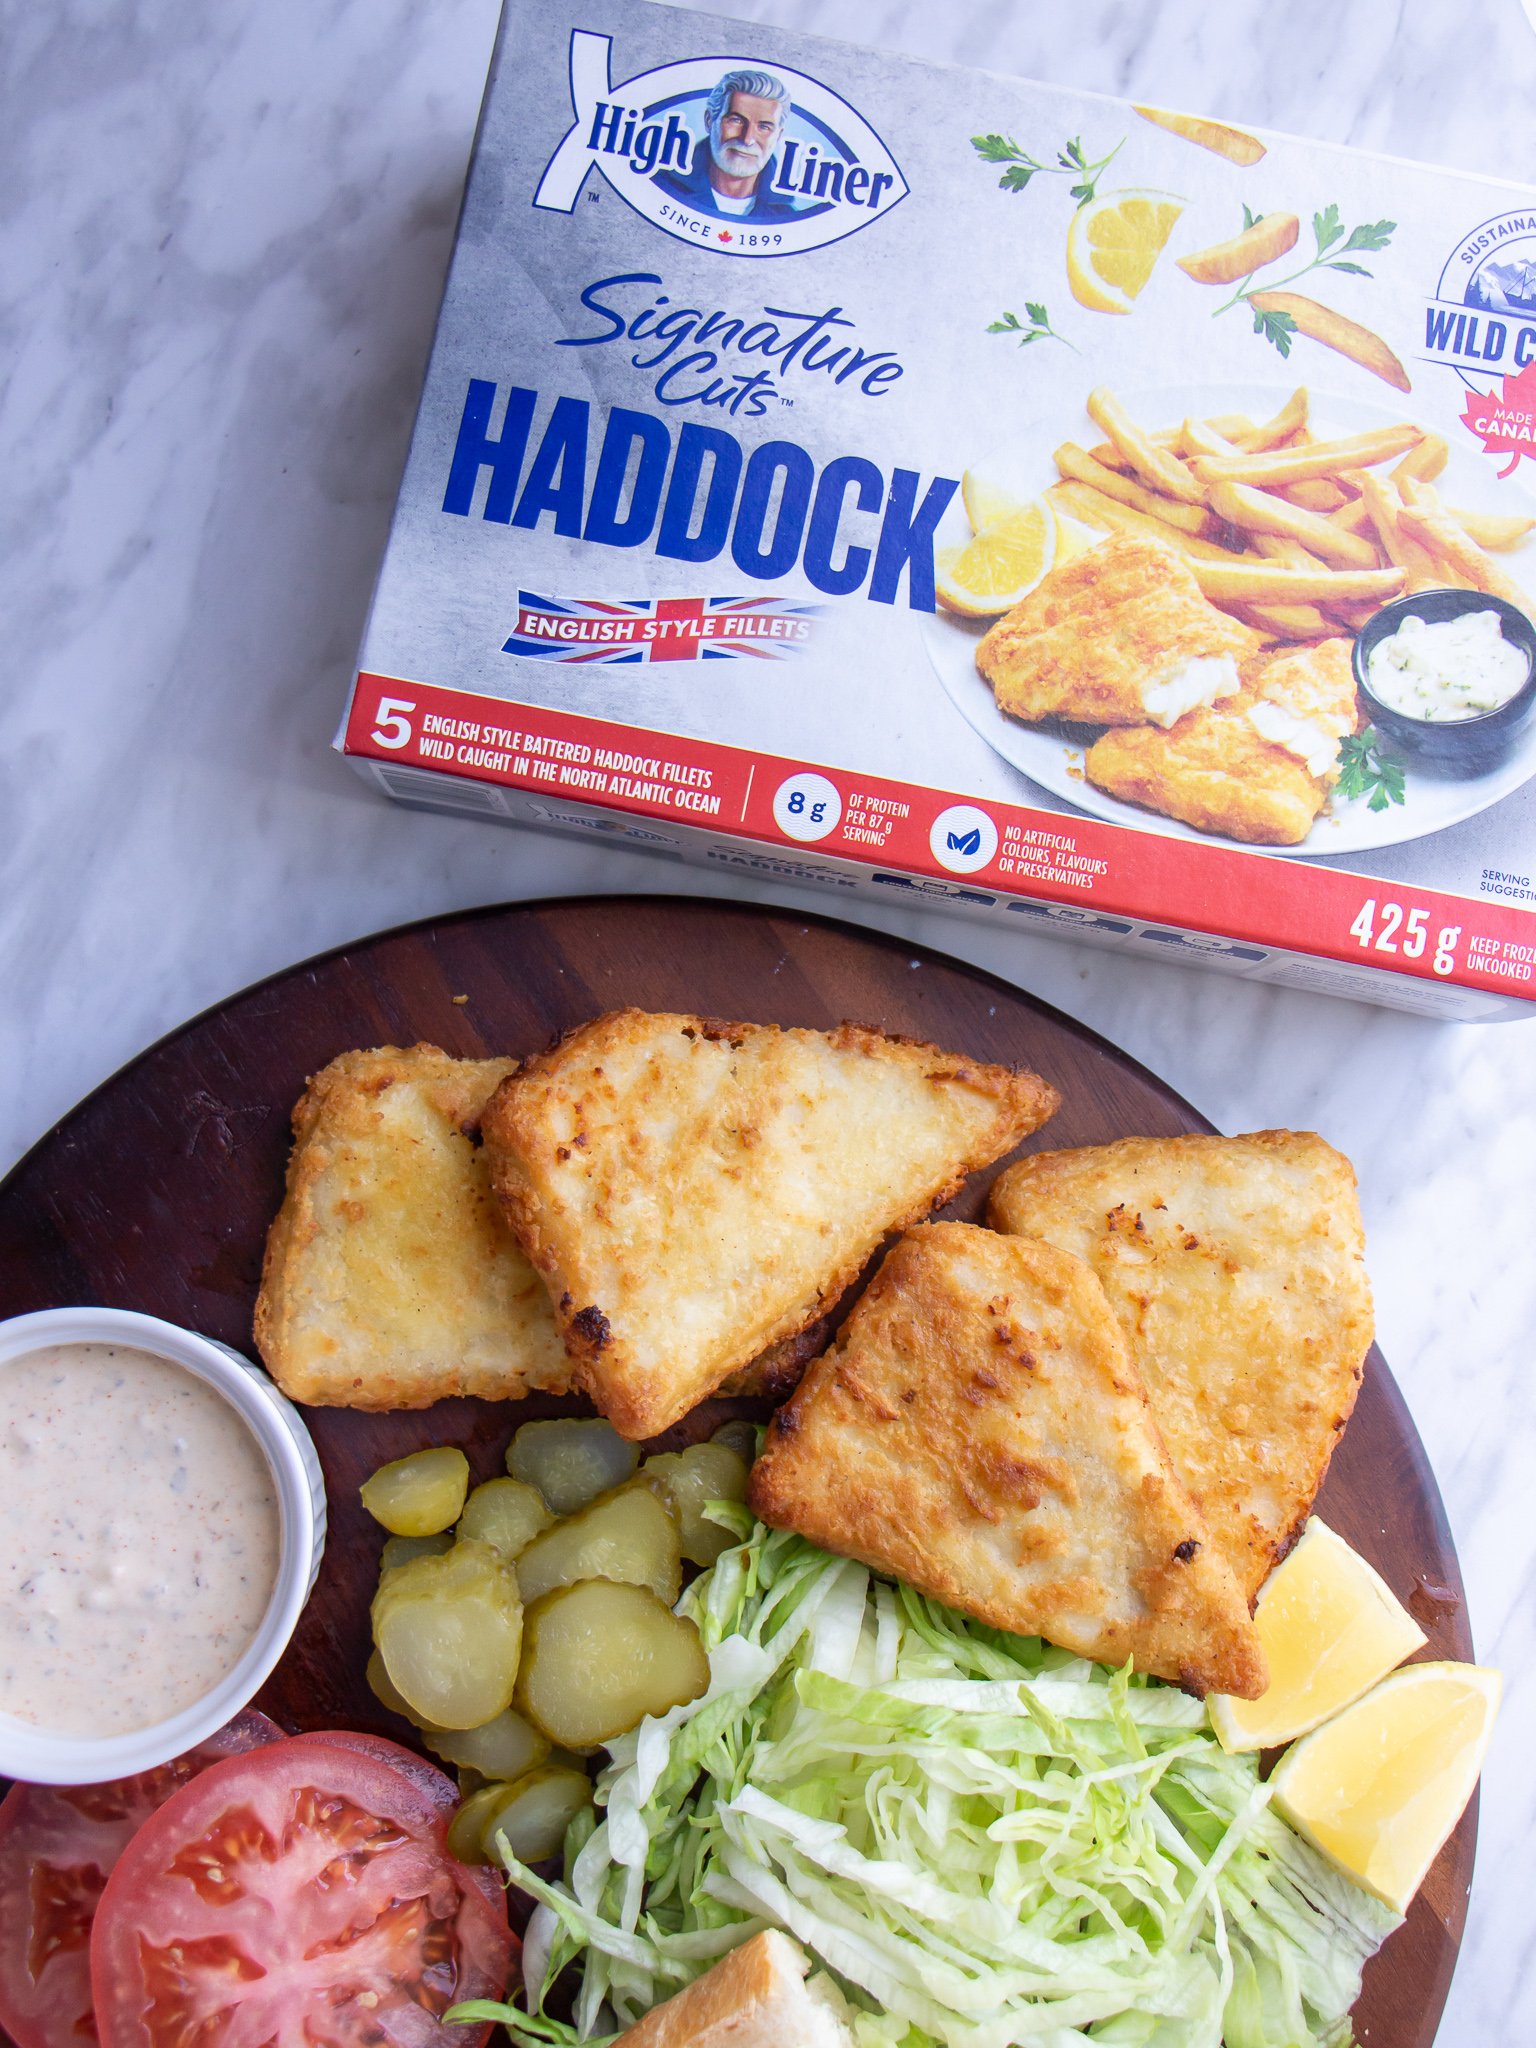 High Liner's Signature Cuts® English Style Battered Haddock Fillets Po’ Boy Sandwich with Cajun Sauce